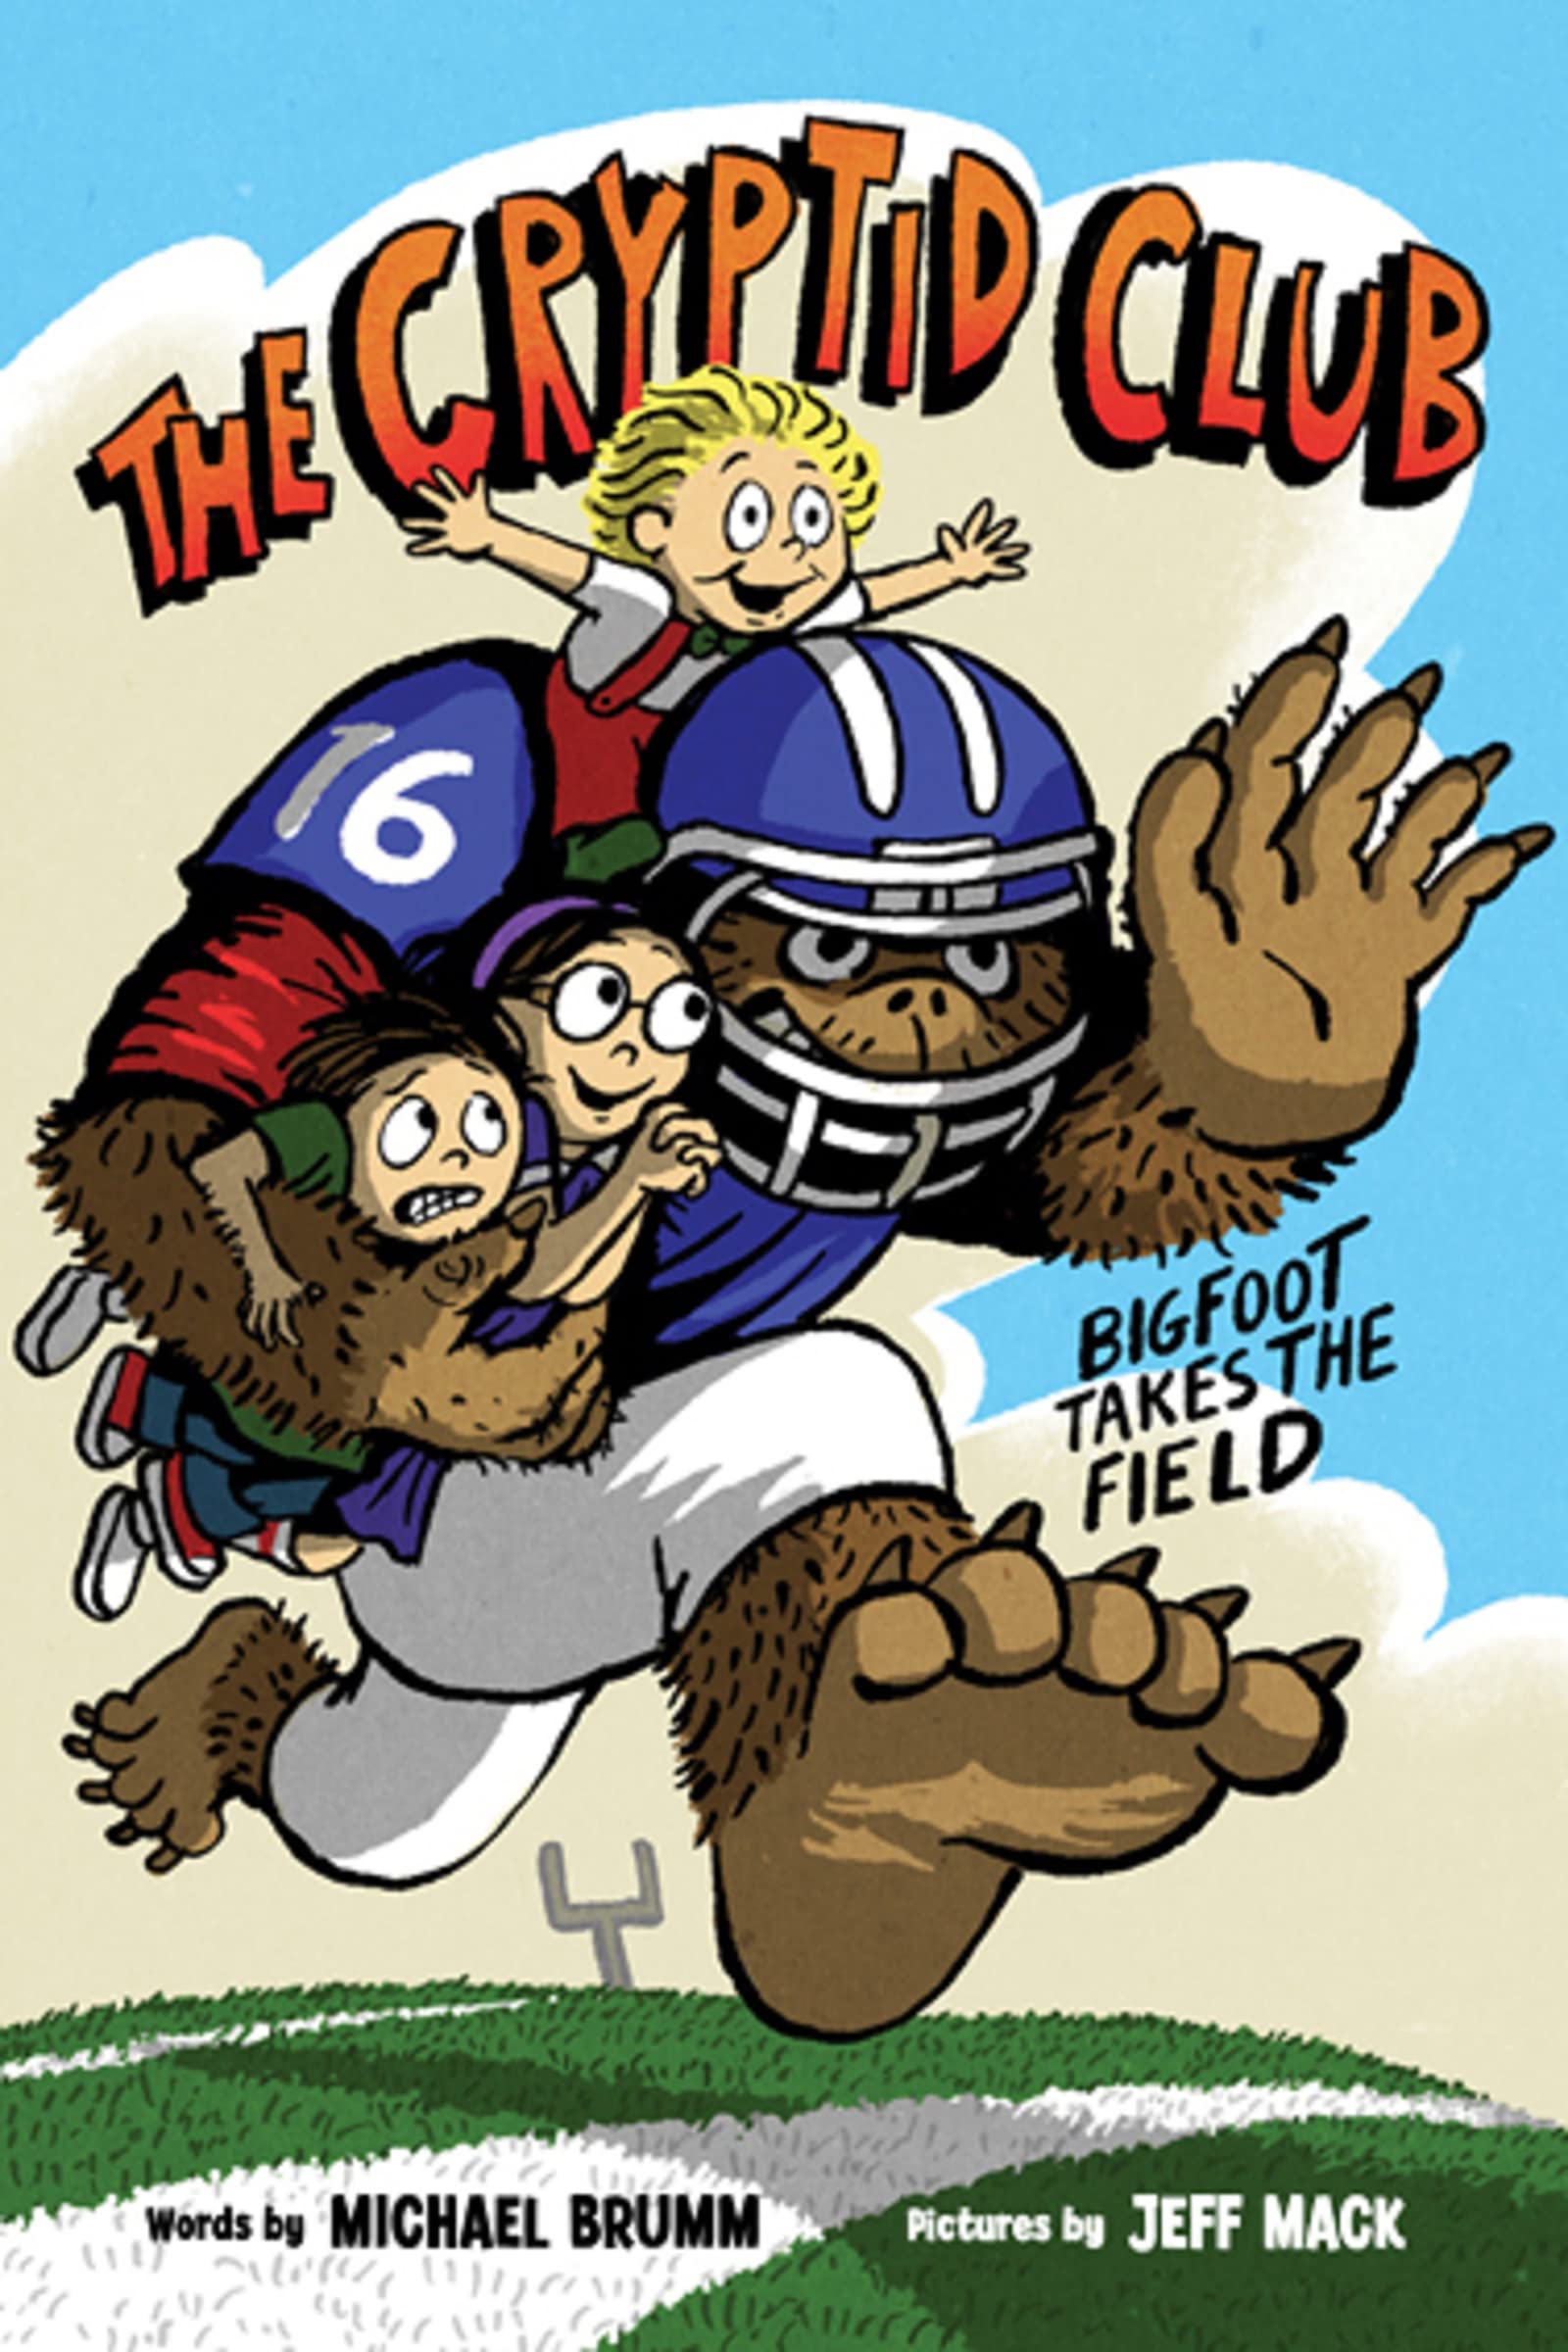 The Cryptid Club #1: Bigfoot Takes the Field (Paperback)